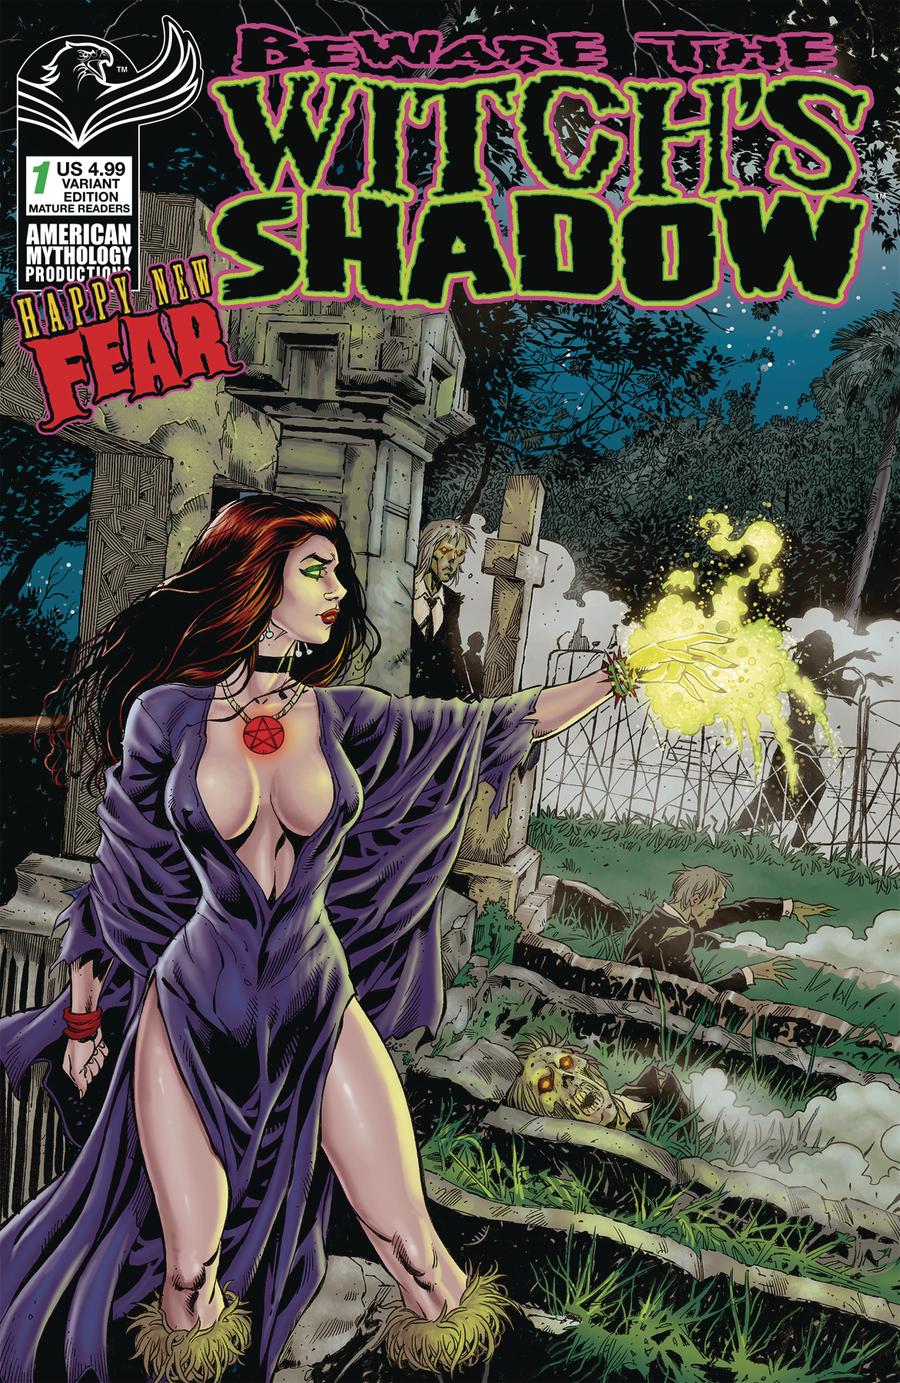 Beware The Witchs Shadow Happy New Fear #1 Cover B Variant Richard Bonk Graveside Cover